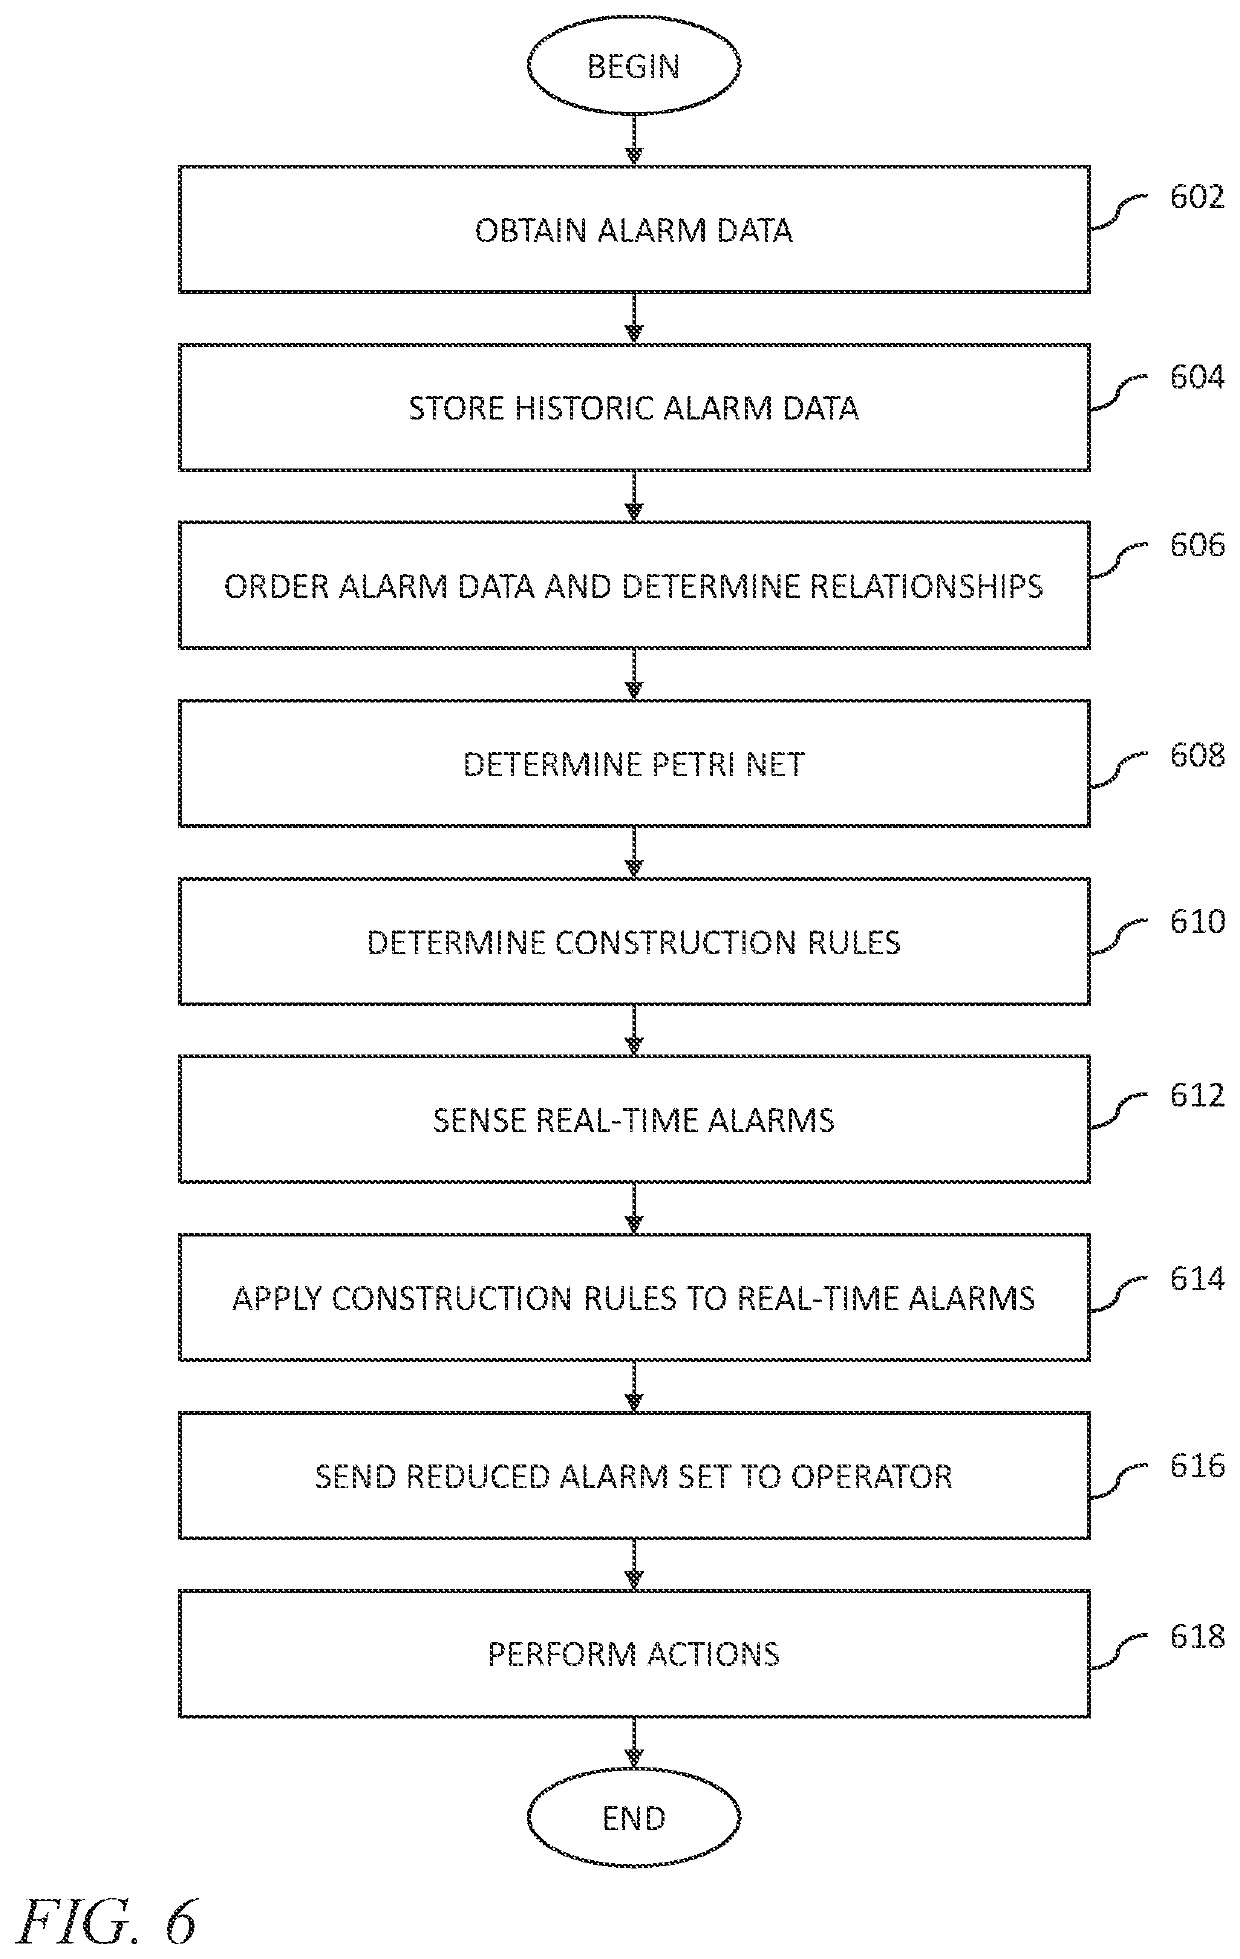 Apparatus and method for alarm management